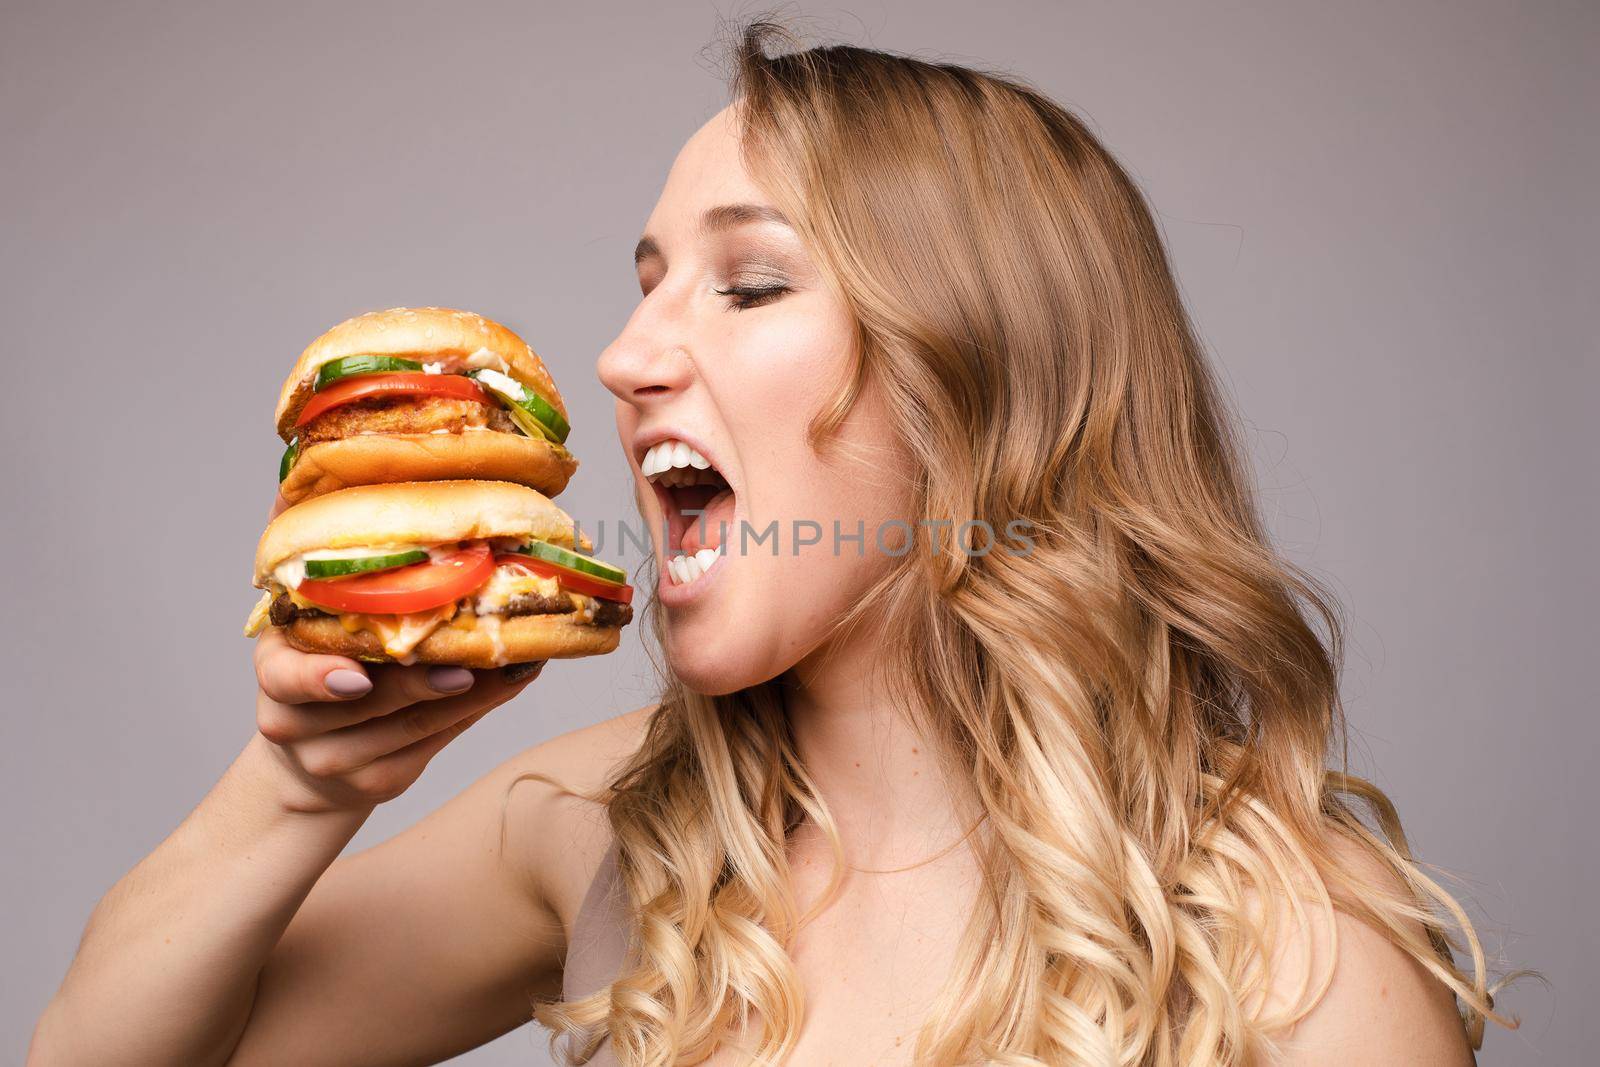 The woman opened her mouth to eat a hamburger by StudioLucky